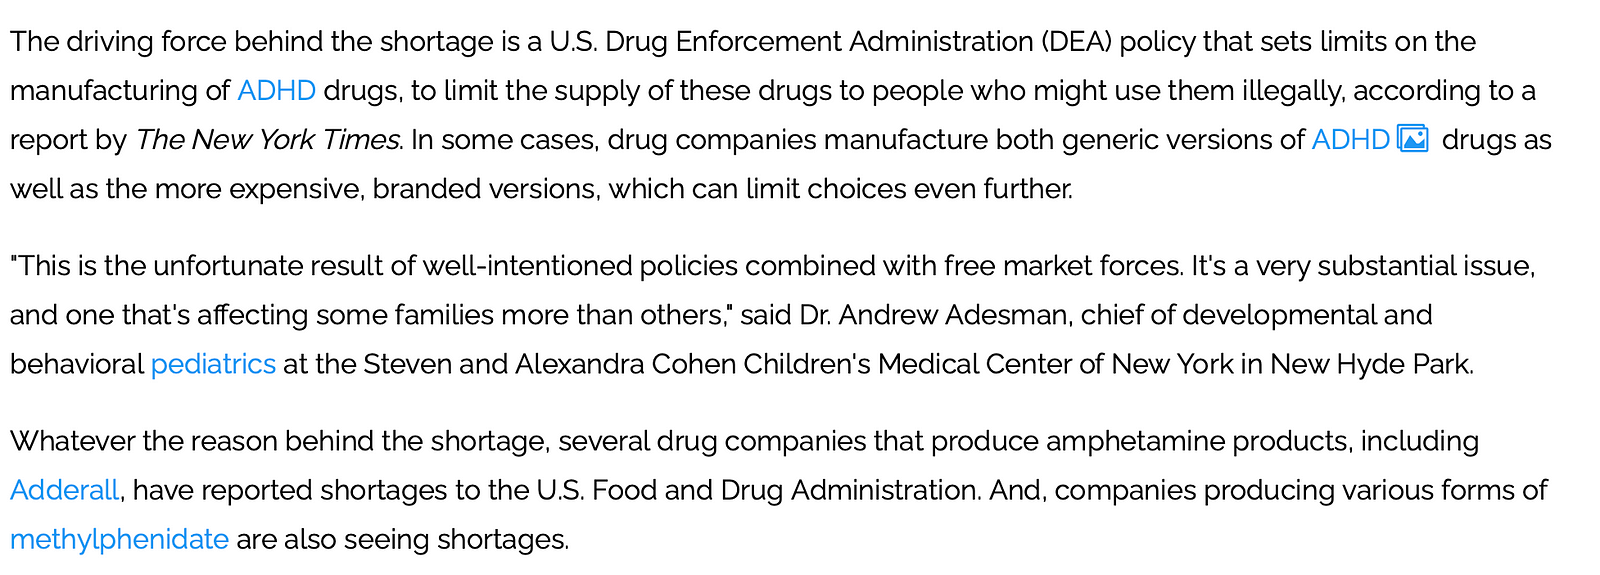 Information on the drug shortage issue in America.